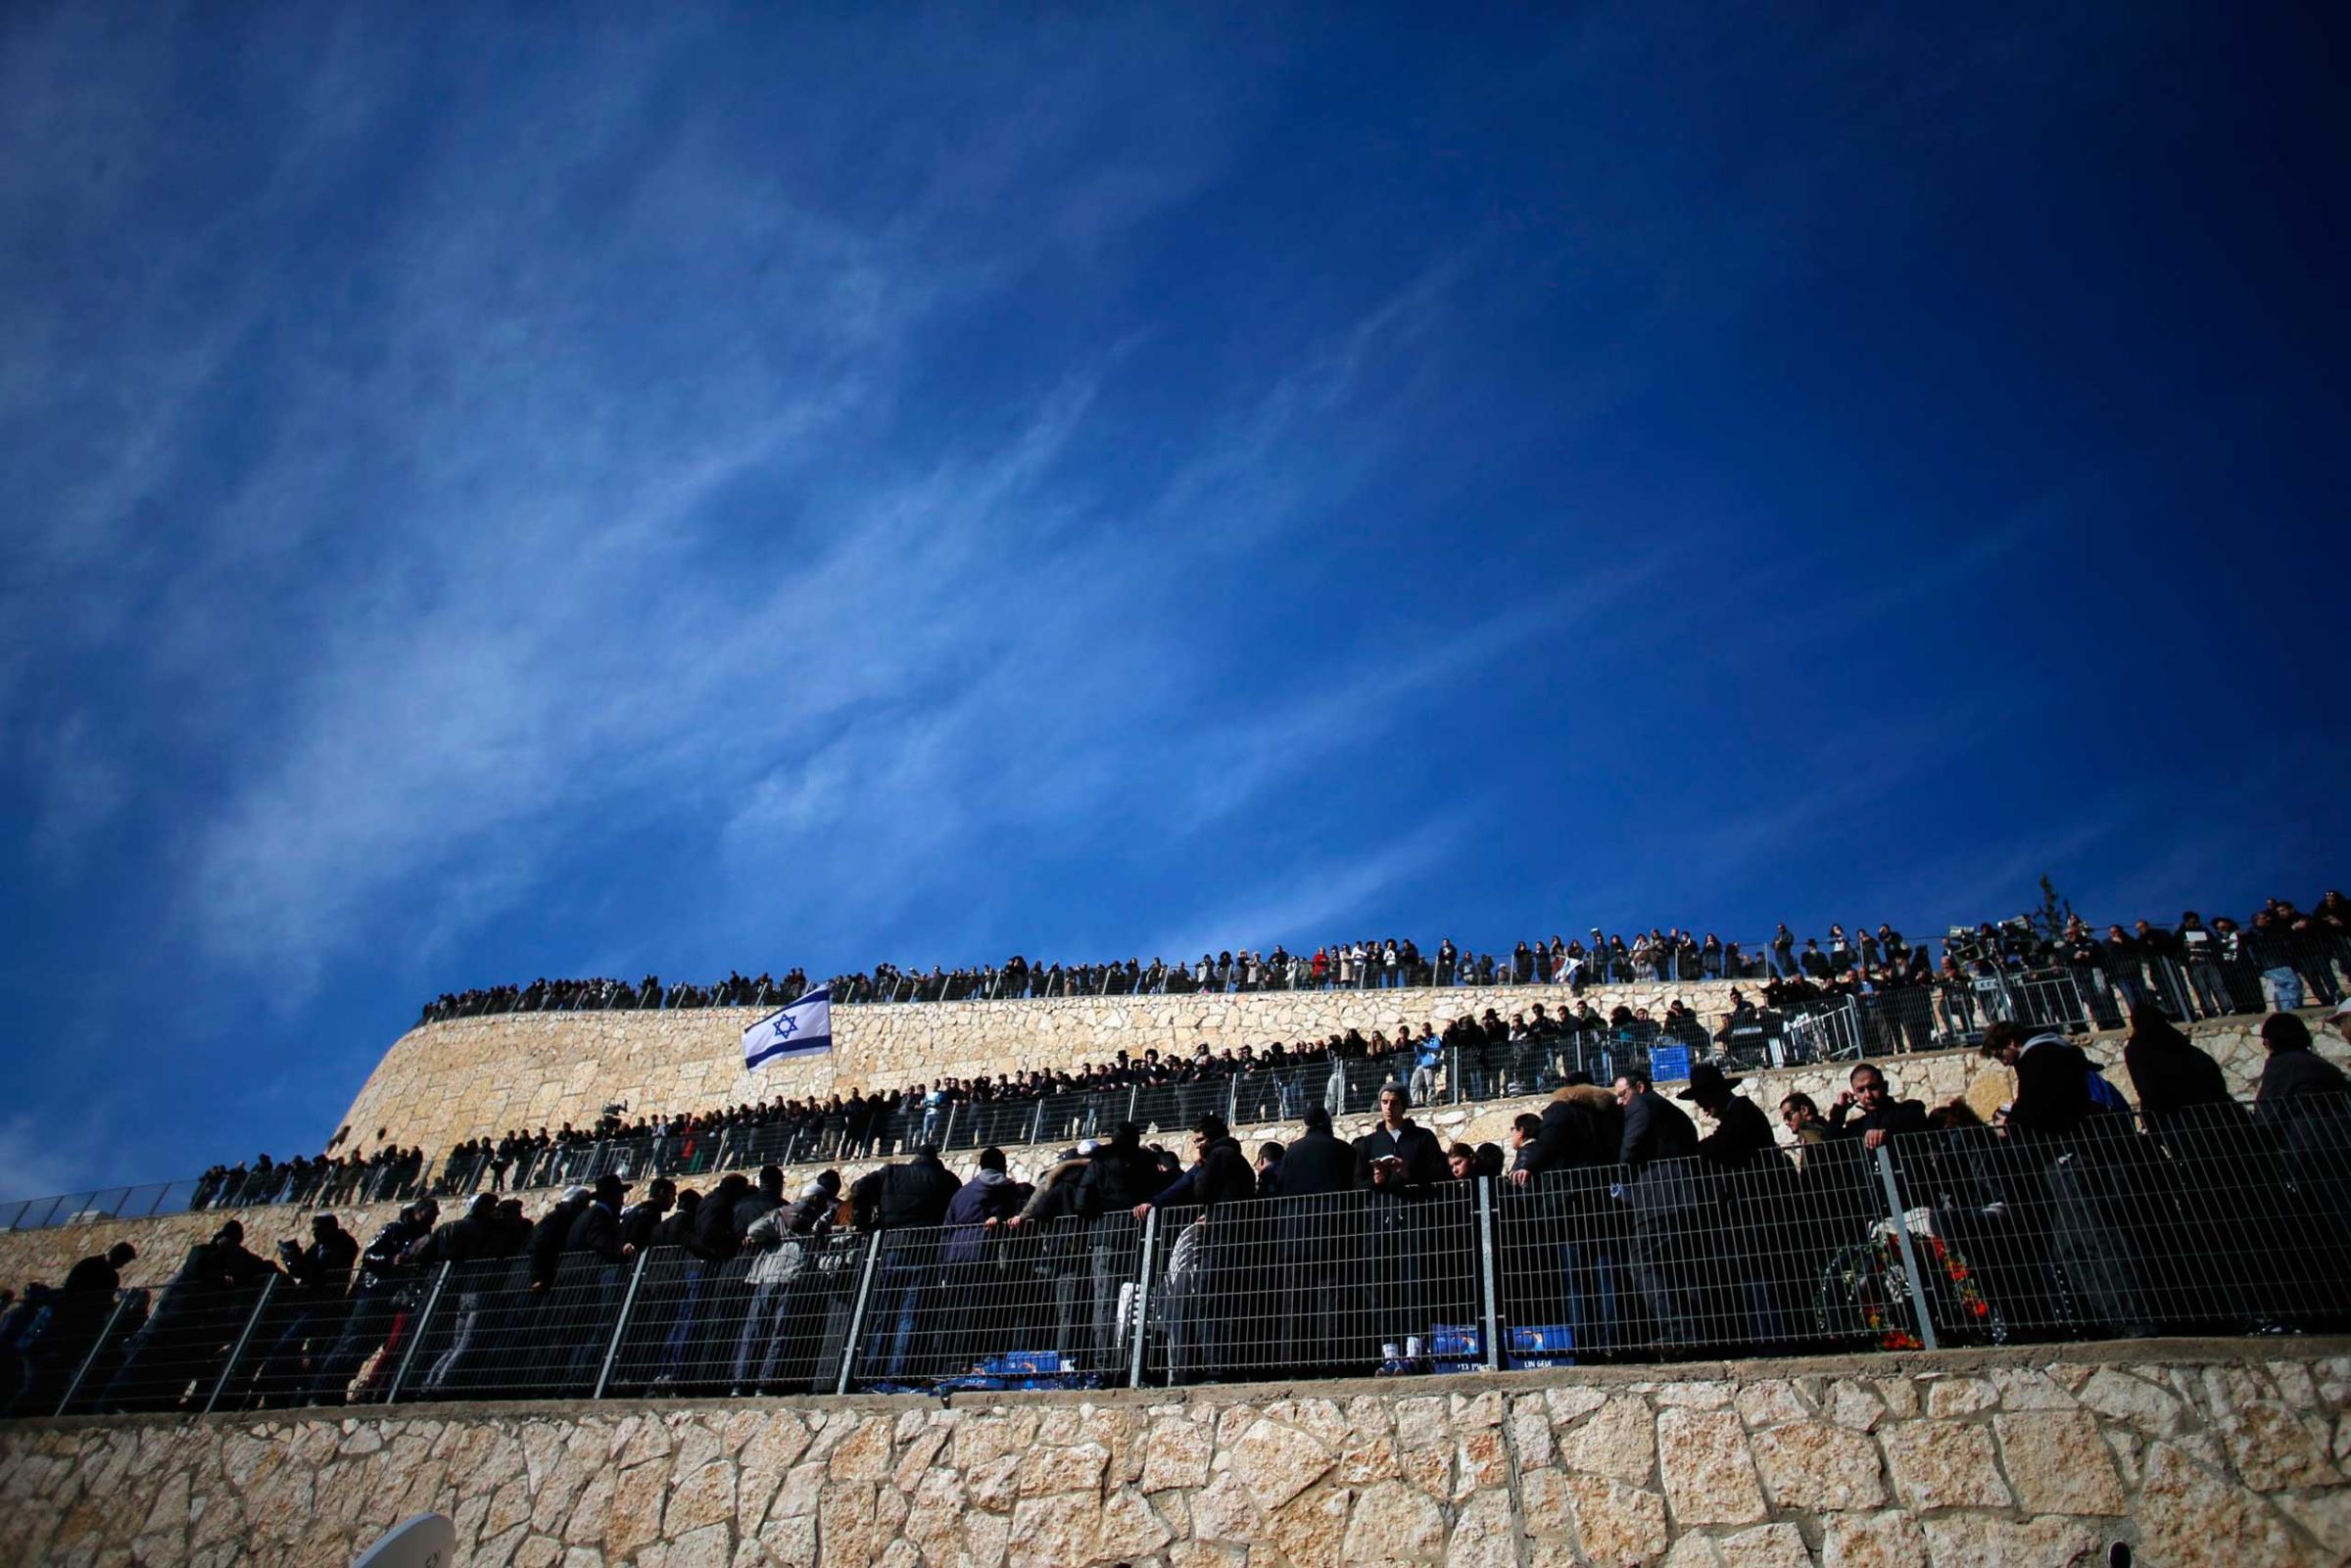 Jan. 13, 2015. Mourners gather for the burial ceremony in Jerusalem for the four victims who were killed by terrorists in a Paris kosher grocery store siege.